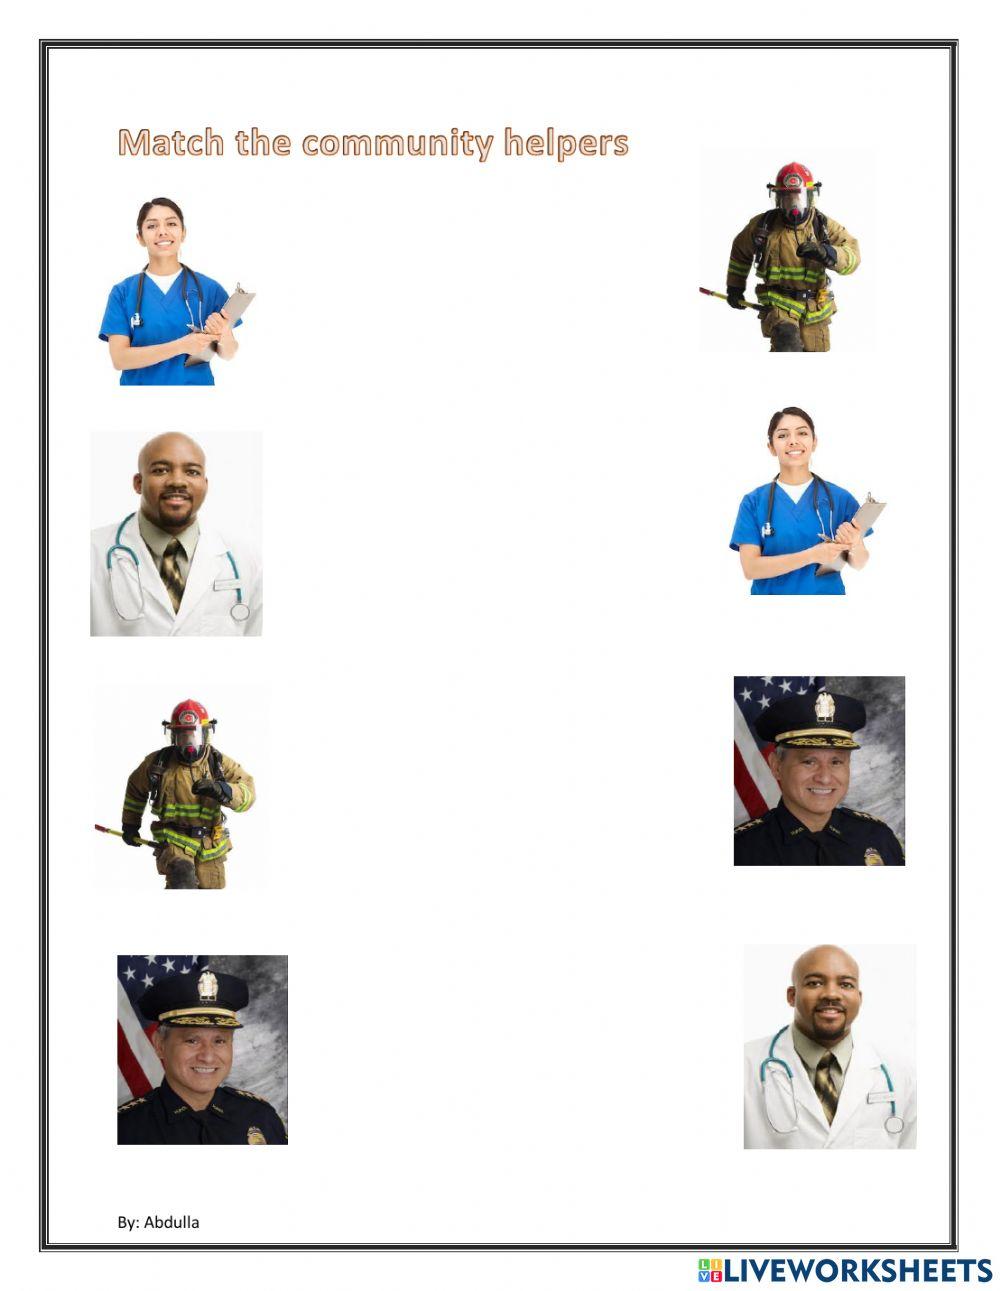 Match the community helpers